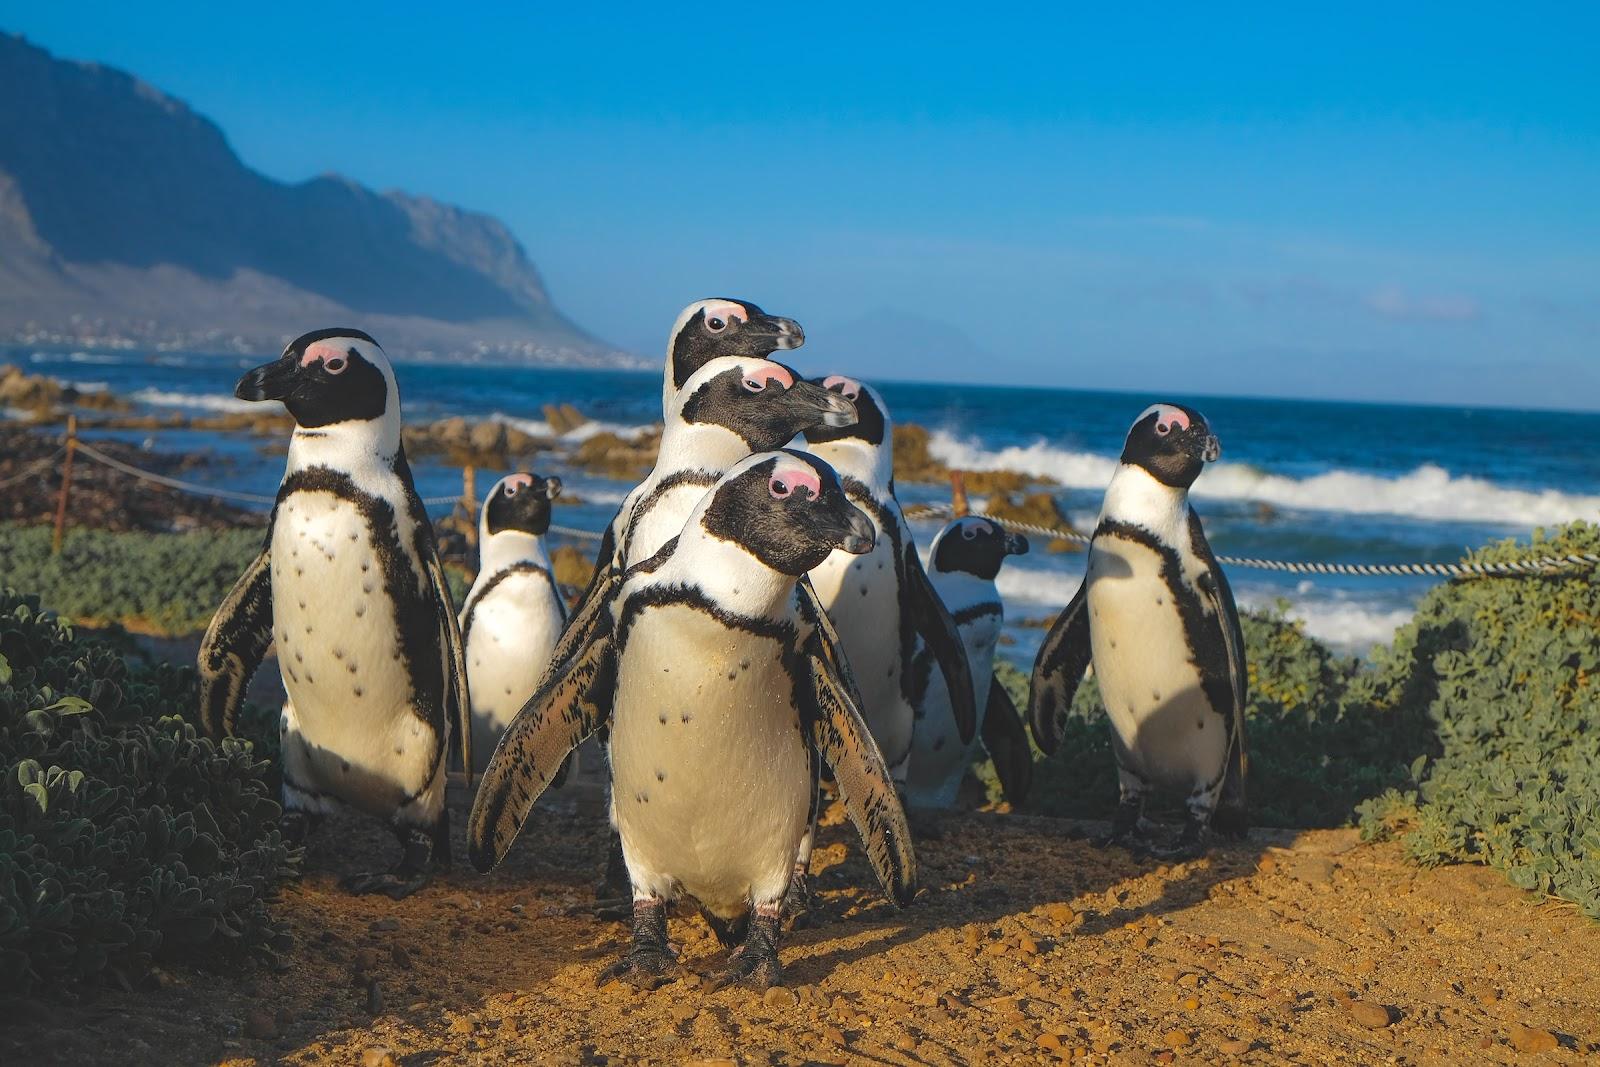 A group of penguins on a beach in South Africa. 